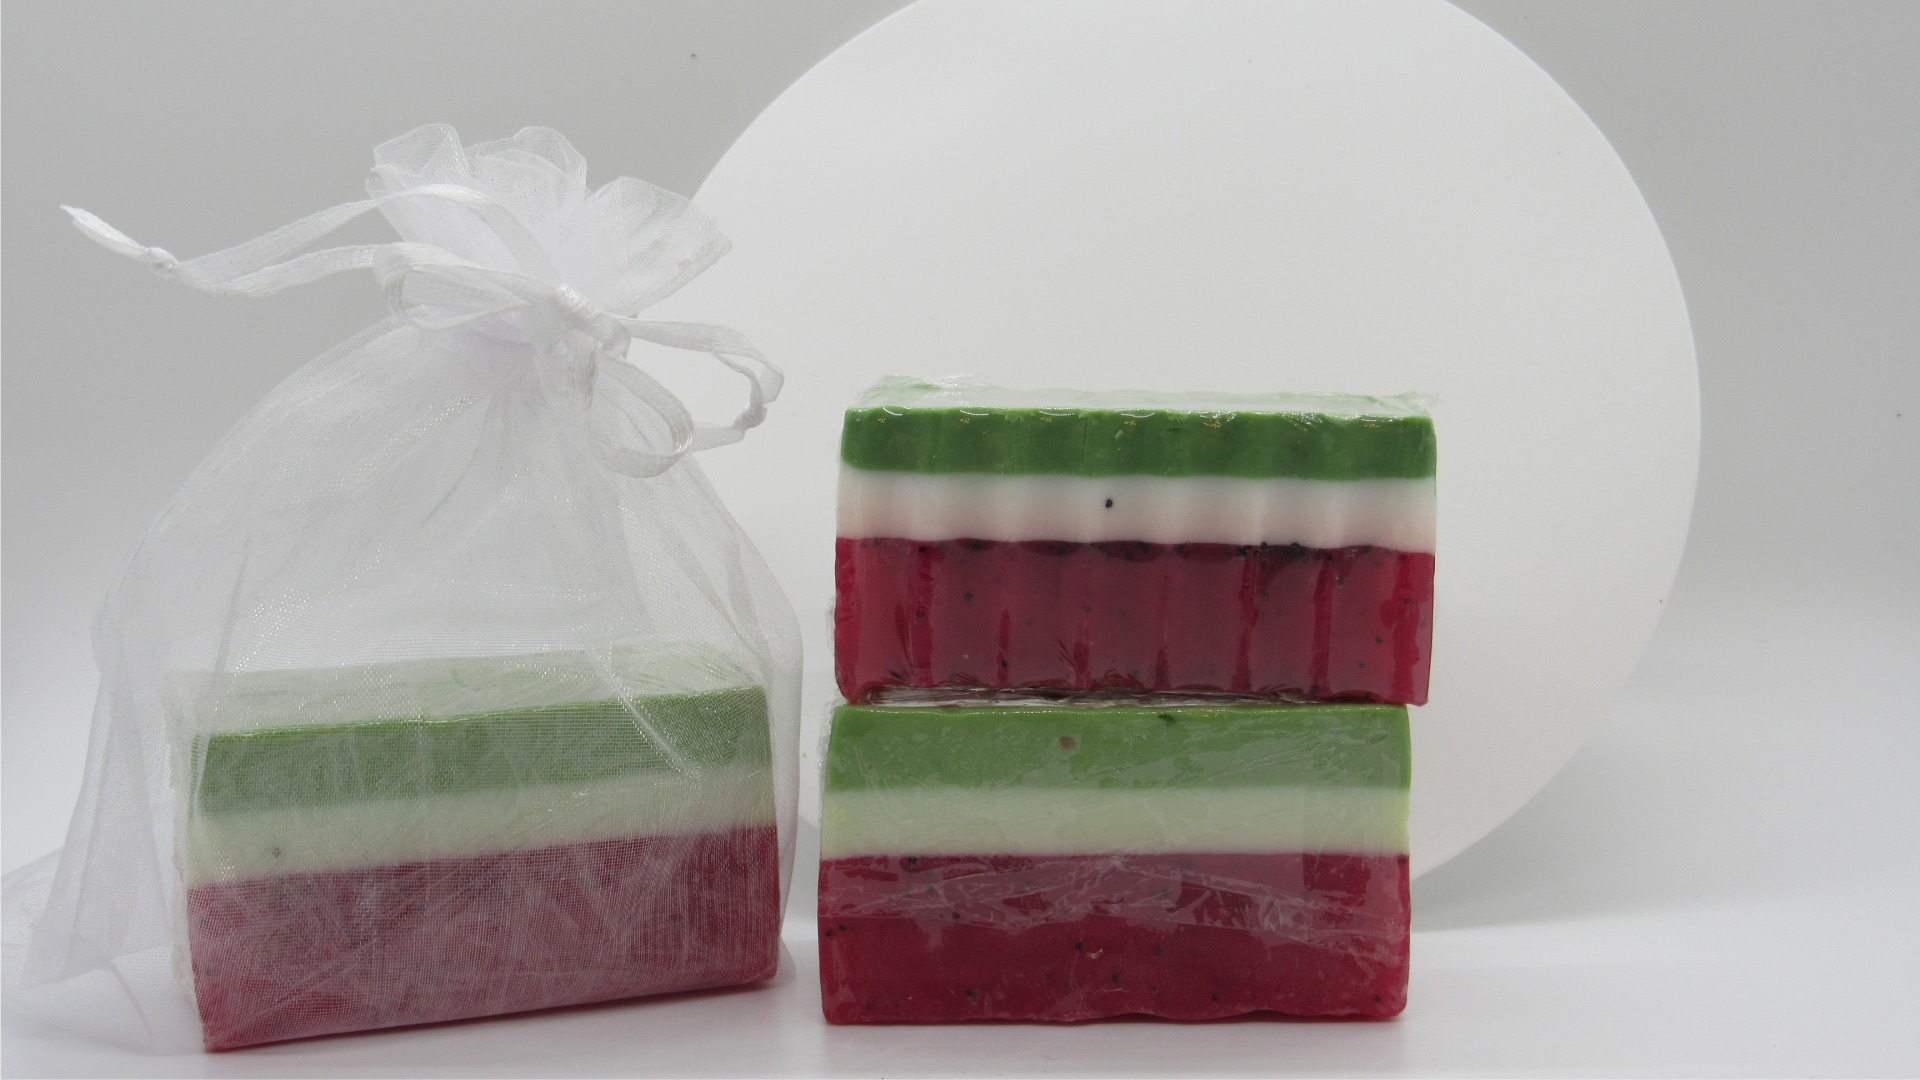 Botanical Power - Product soap array samples